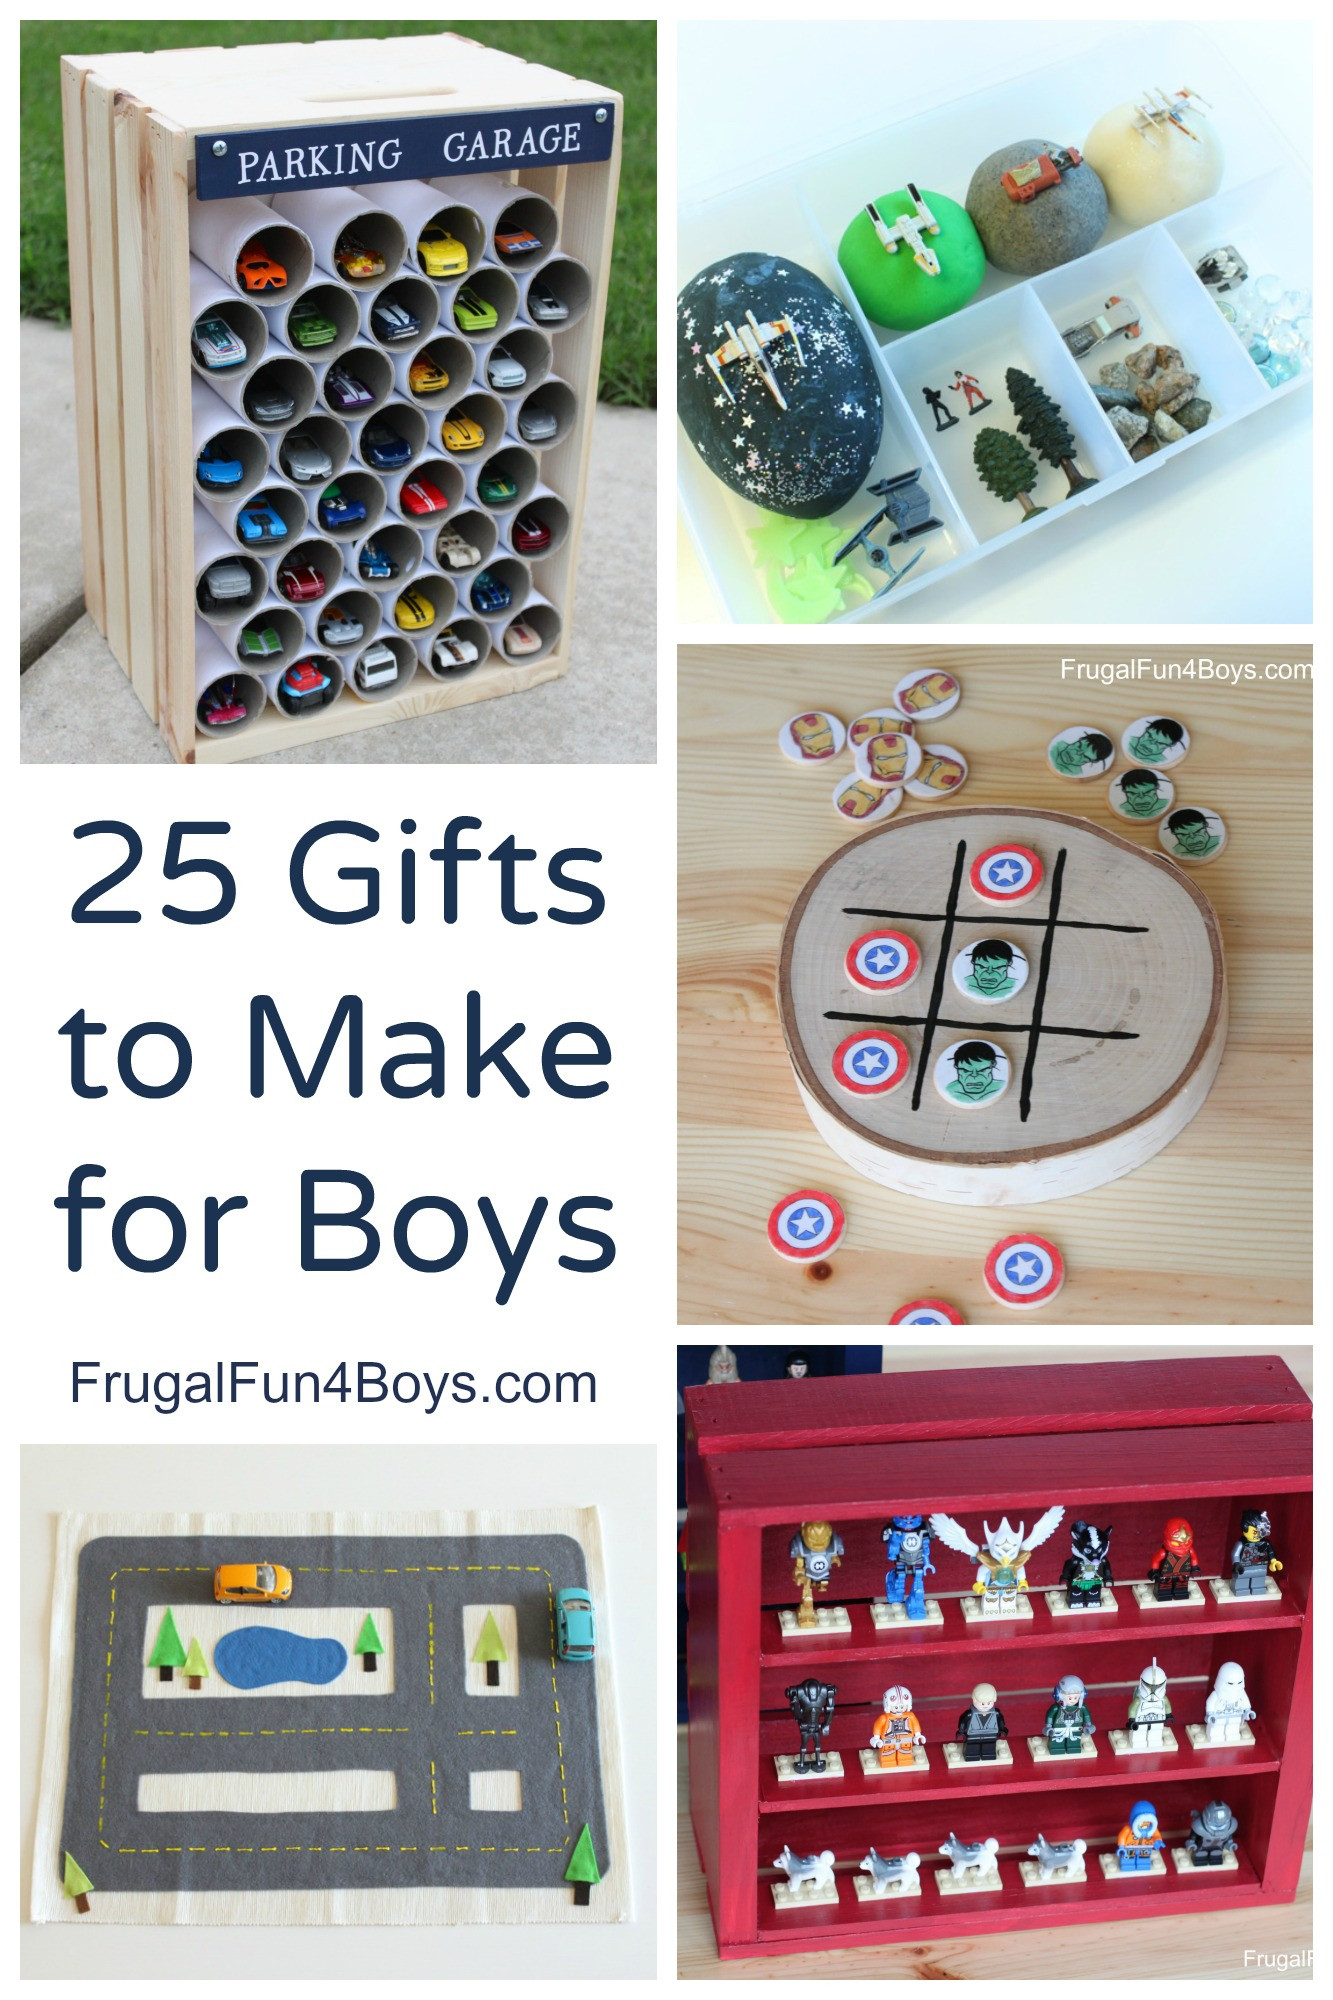 Cool Gift Ideas For Boys
 25 More Homemade Gifts to Make for Boys Frugal Fun For